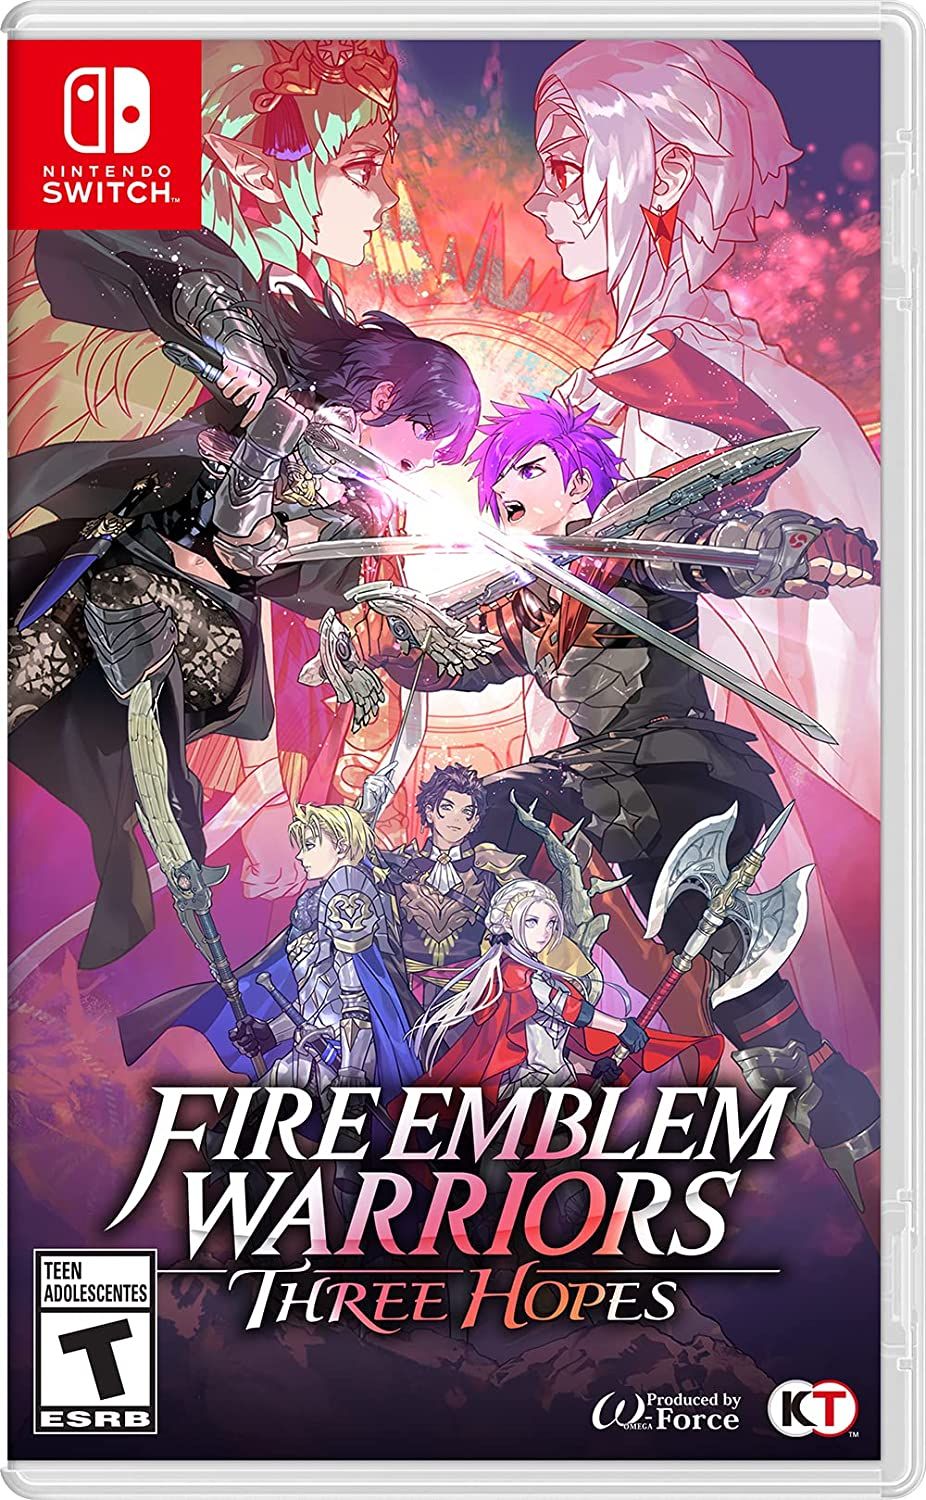 Fire Emblem Warriors Three Hopes Cover with two warriors clashing their swords together angrily